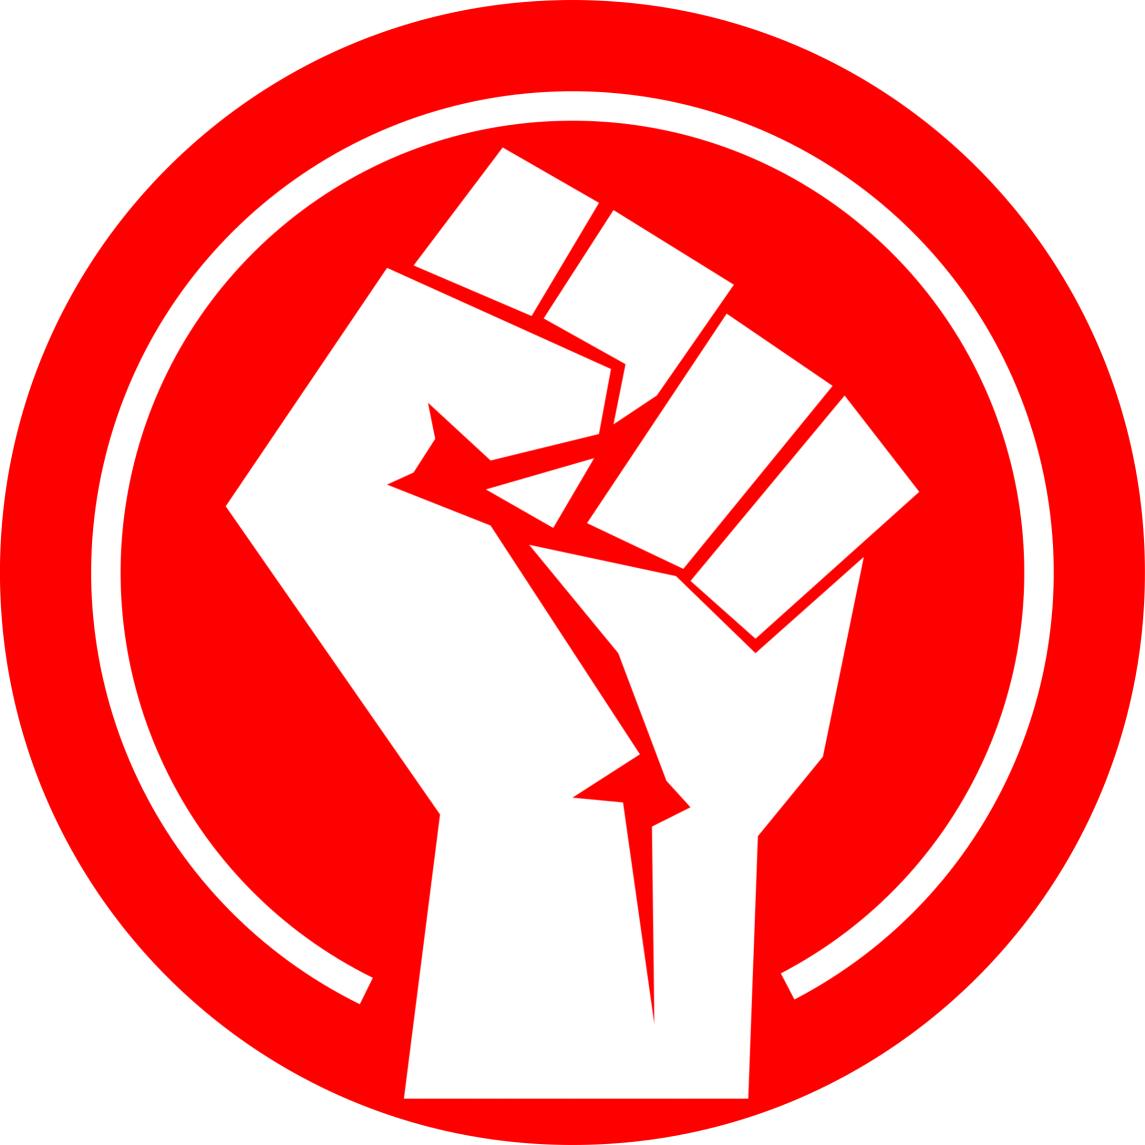 Marxist blm Left Fist Logo with transparency Blank Meme Template